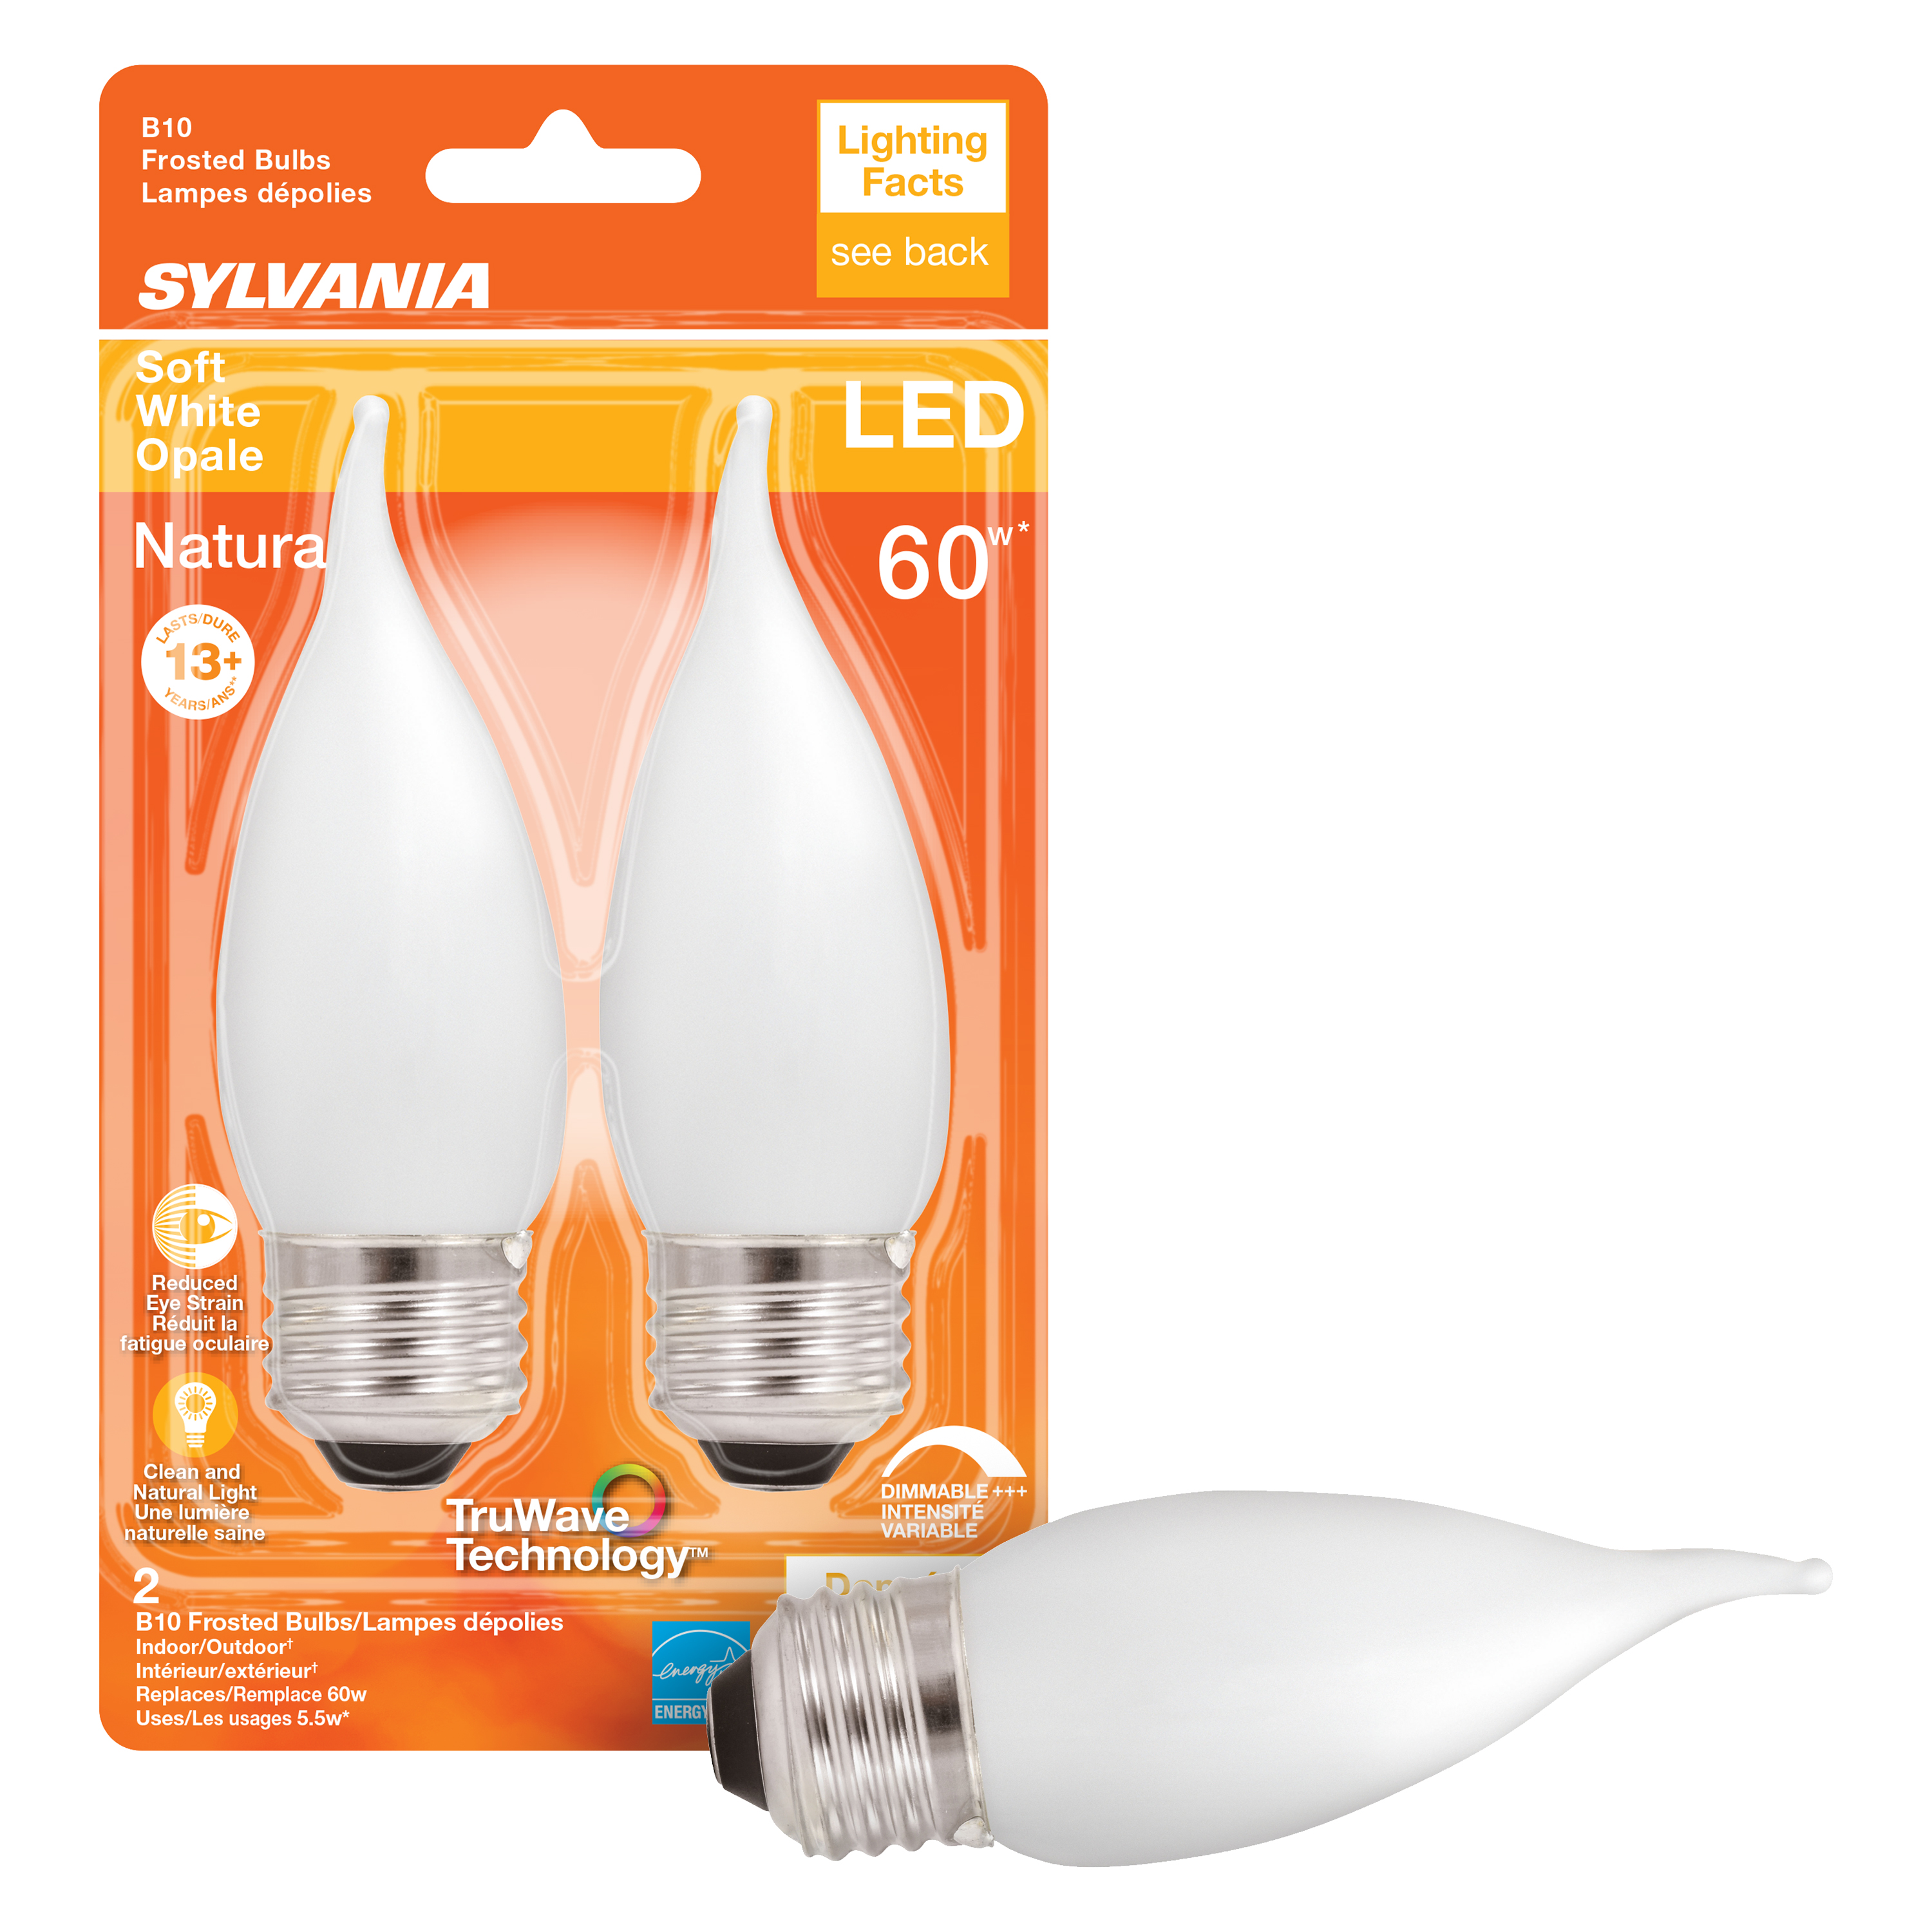 Sylvania 40783 Natural LED Bulb, Decorative, B10 Bent Tip Lamp, 60 W Equivalent, E26 Lamp Base, Dimmable, Frosted